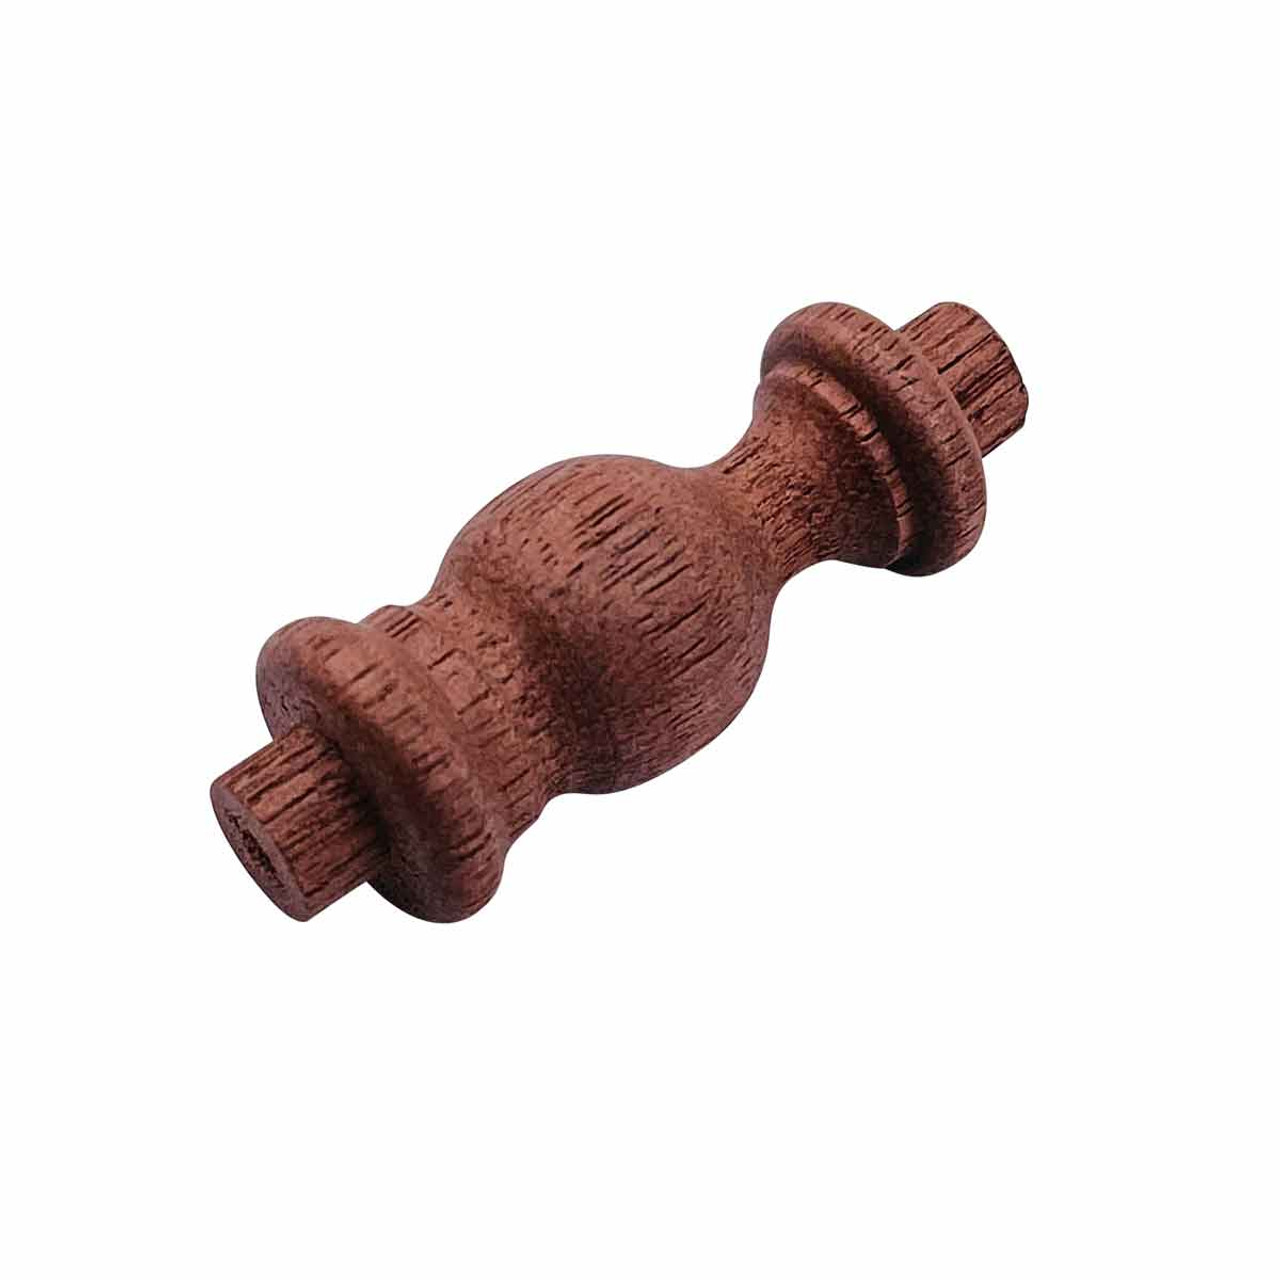 Turkish Spindle #429 - Cherry - Standard - 4 1/2 arms - True Creations  Spindles